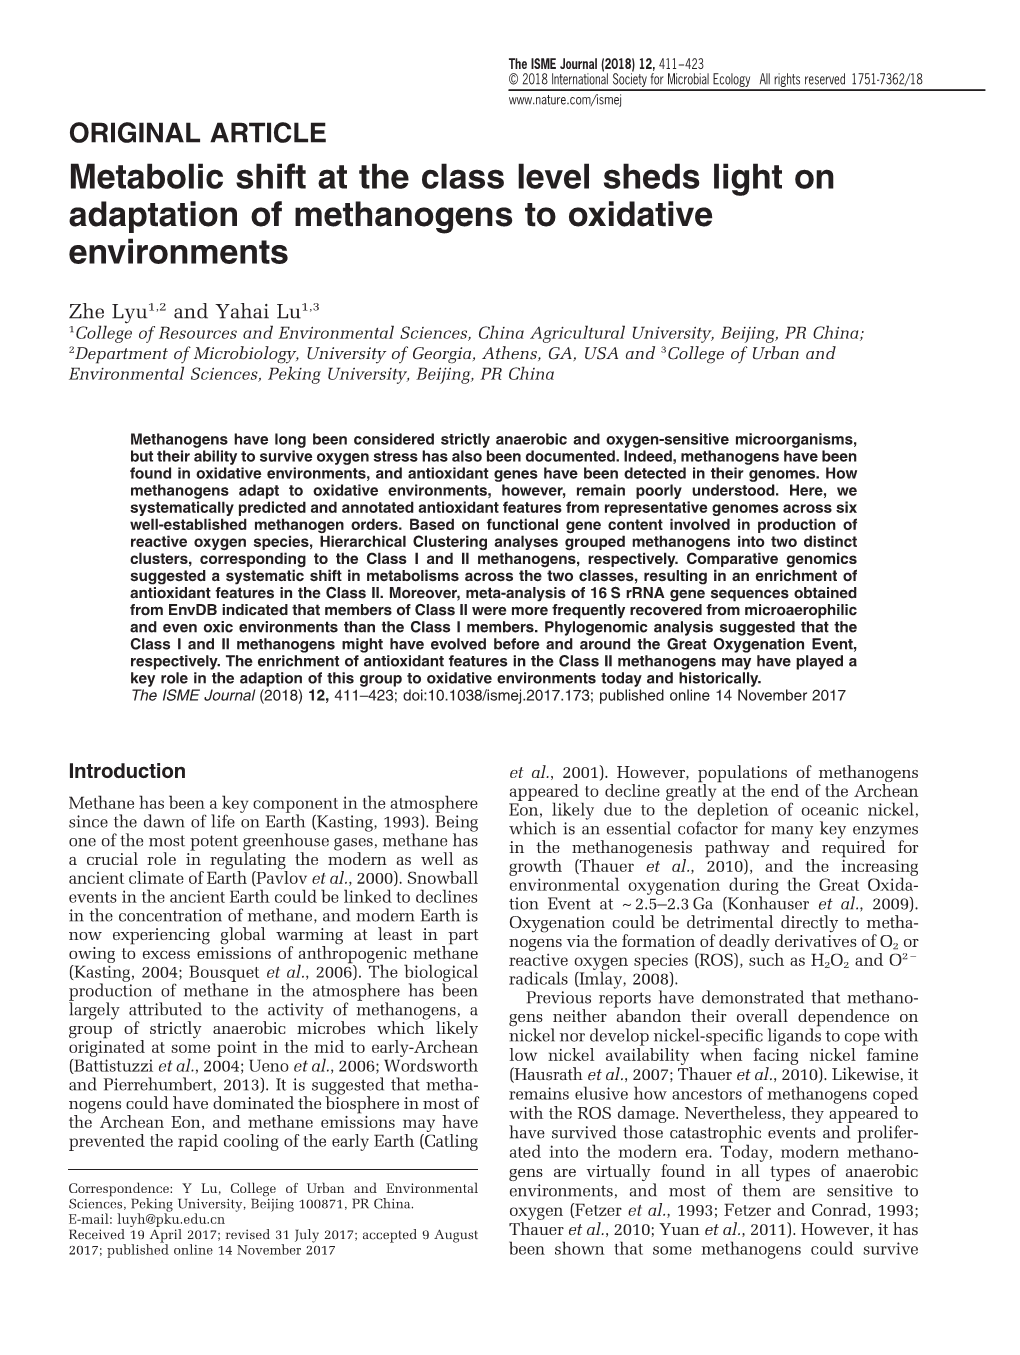 Metabolic Shift at the Class Level Sheds Light on Adaptation of Methanogens to Oxidative Environments